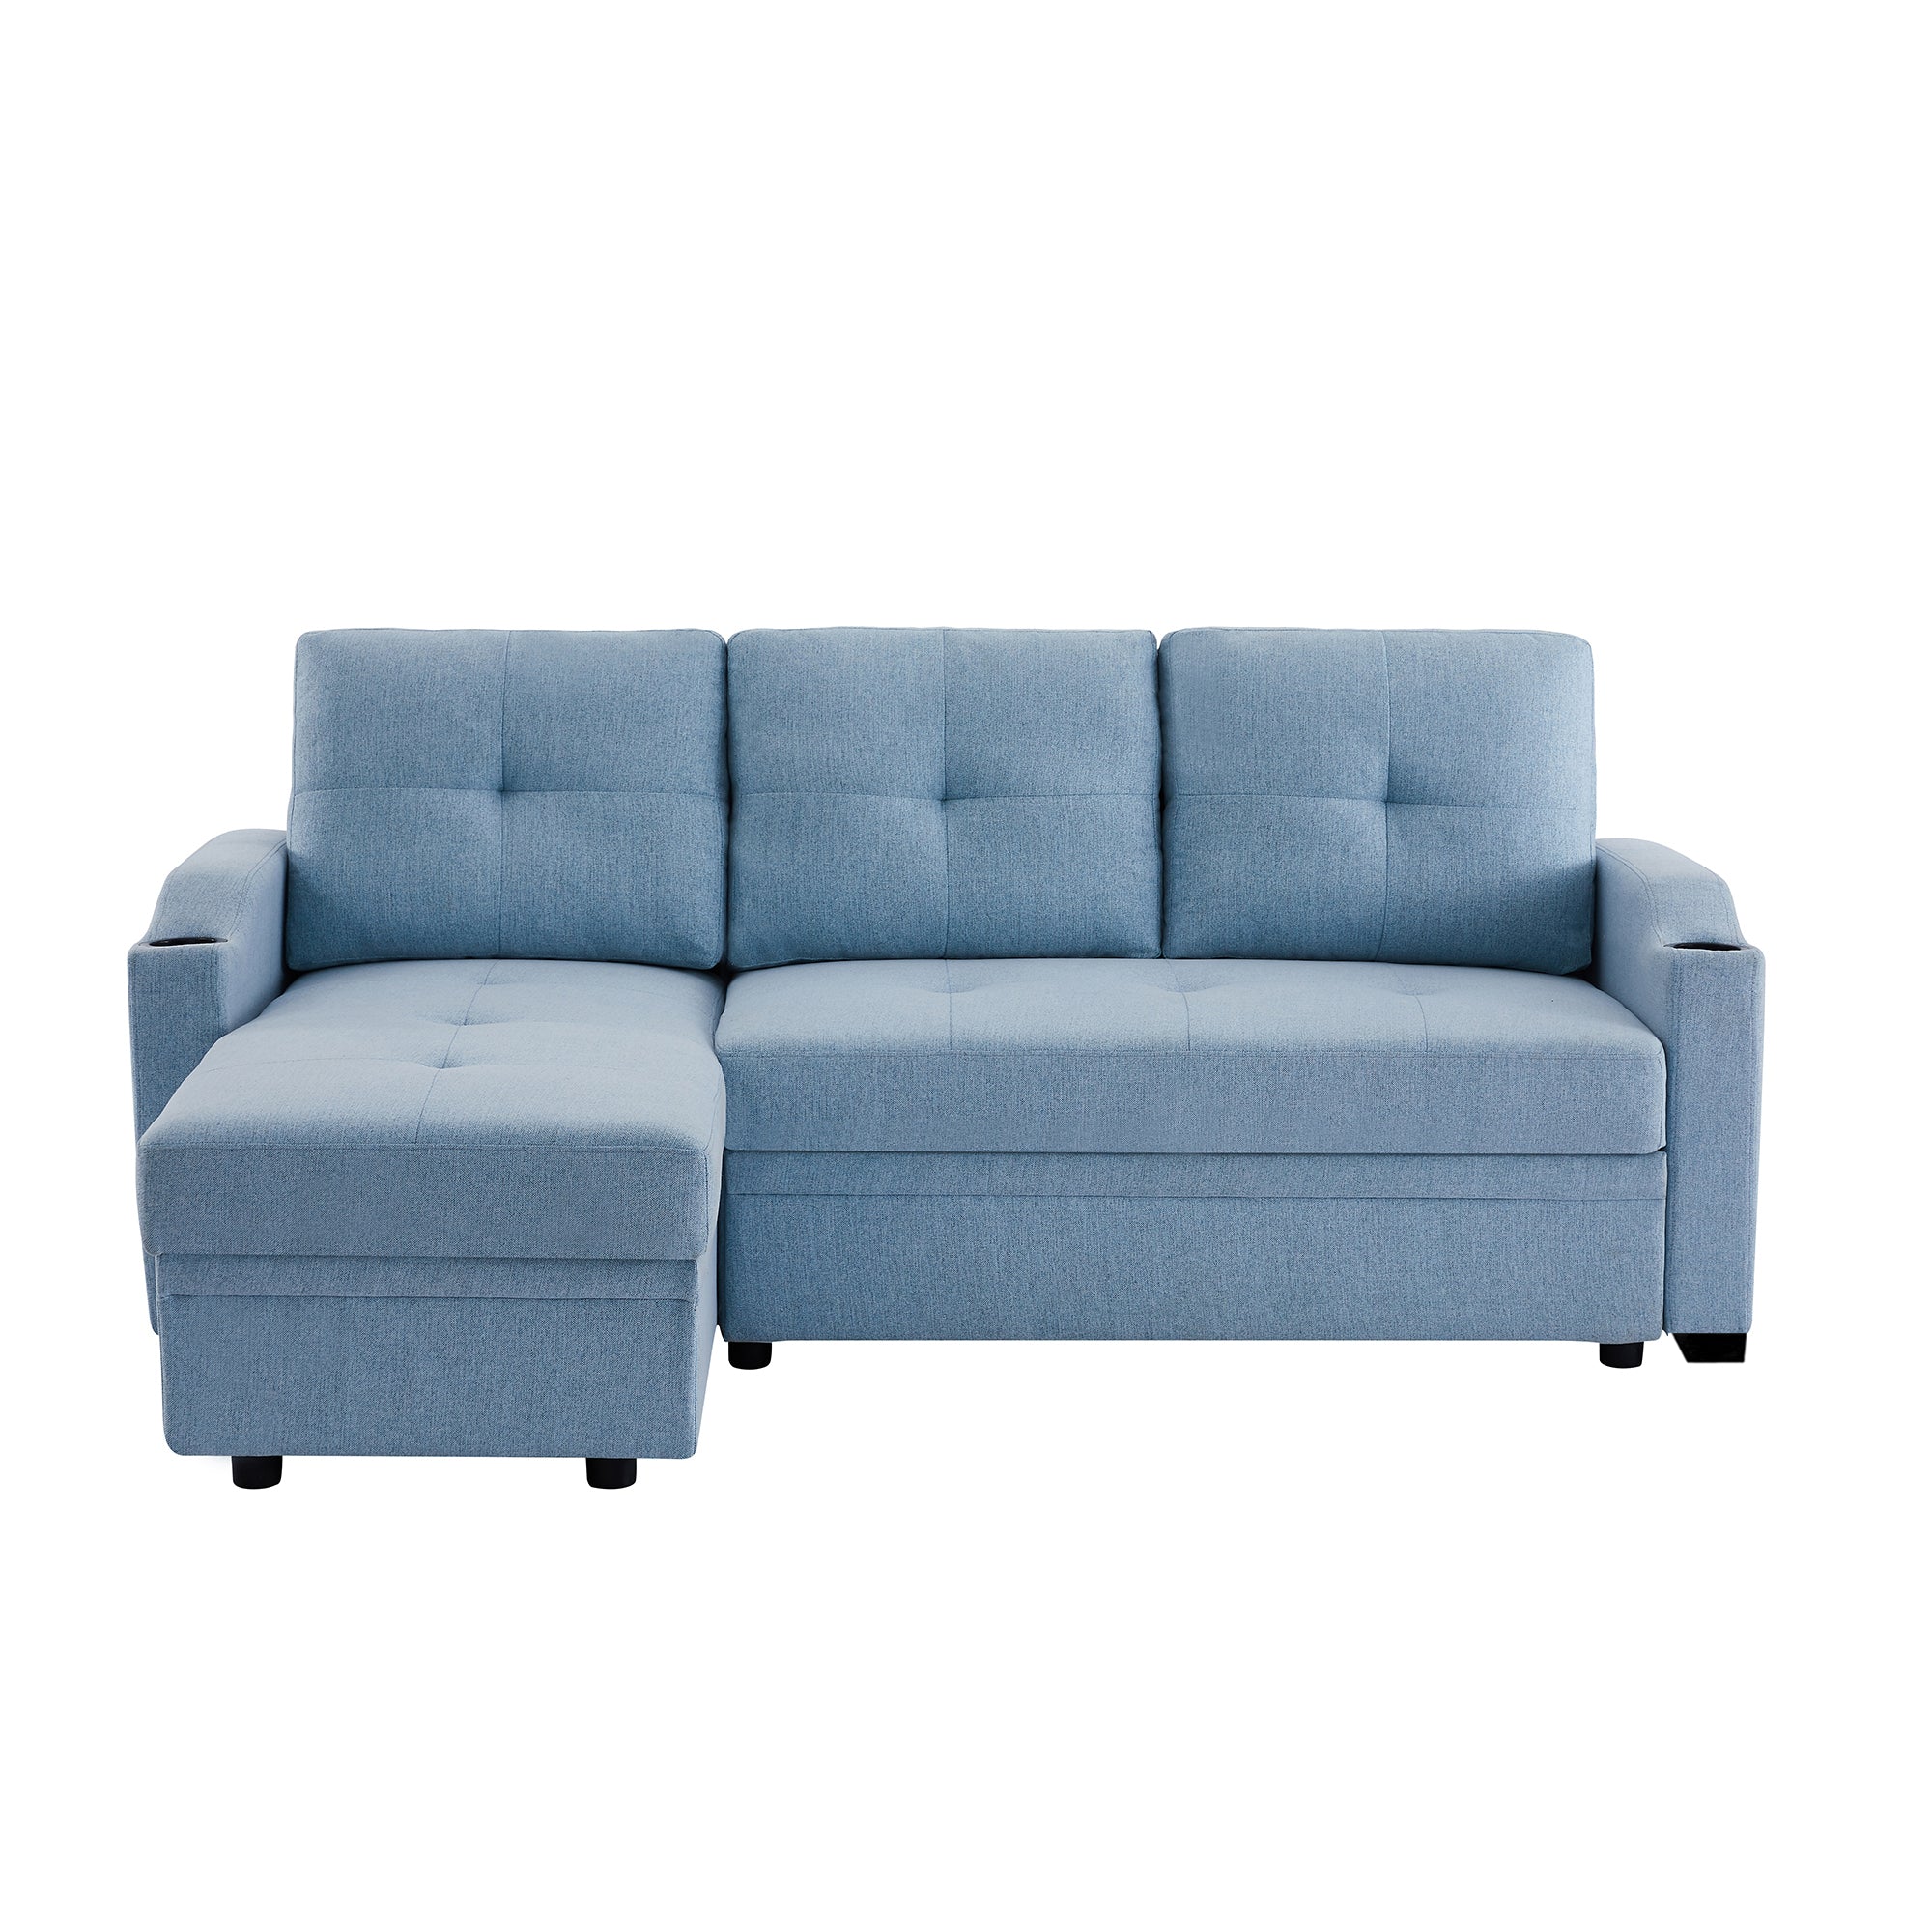 81" Reversible Sectional Couch with Storage Chaise and Two Cup Holders-Boyel Living